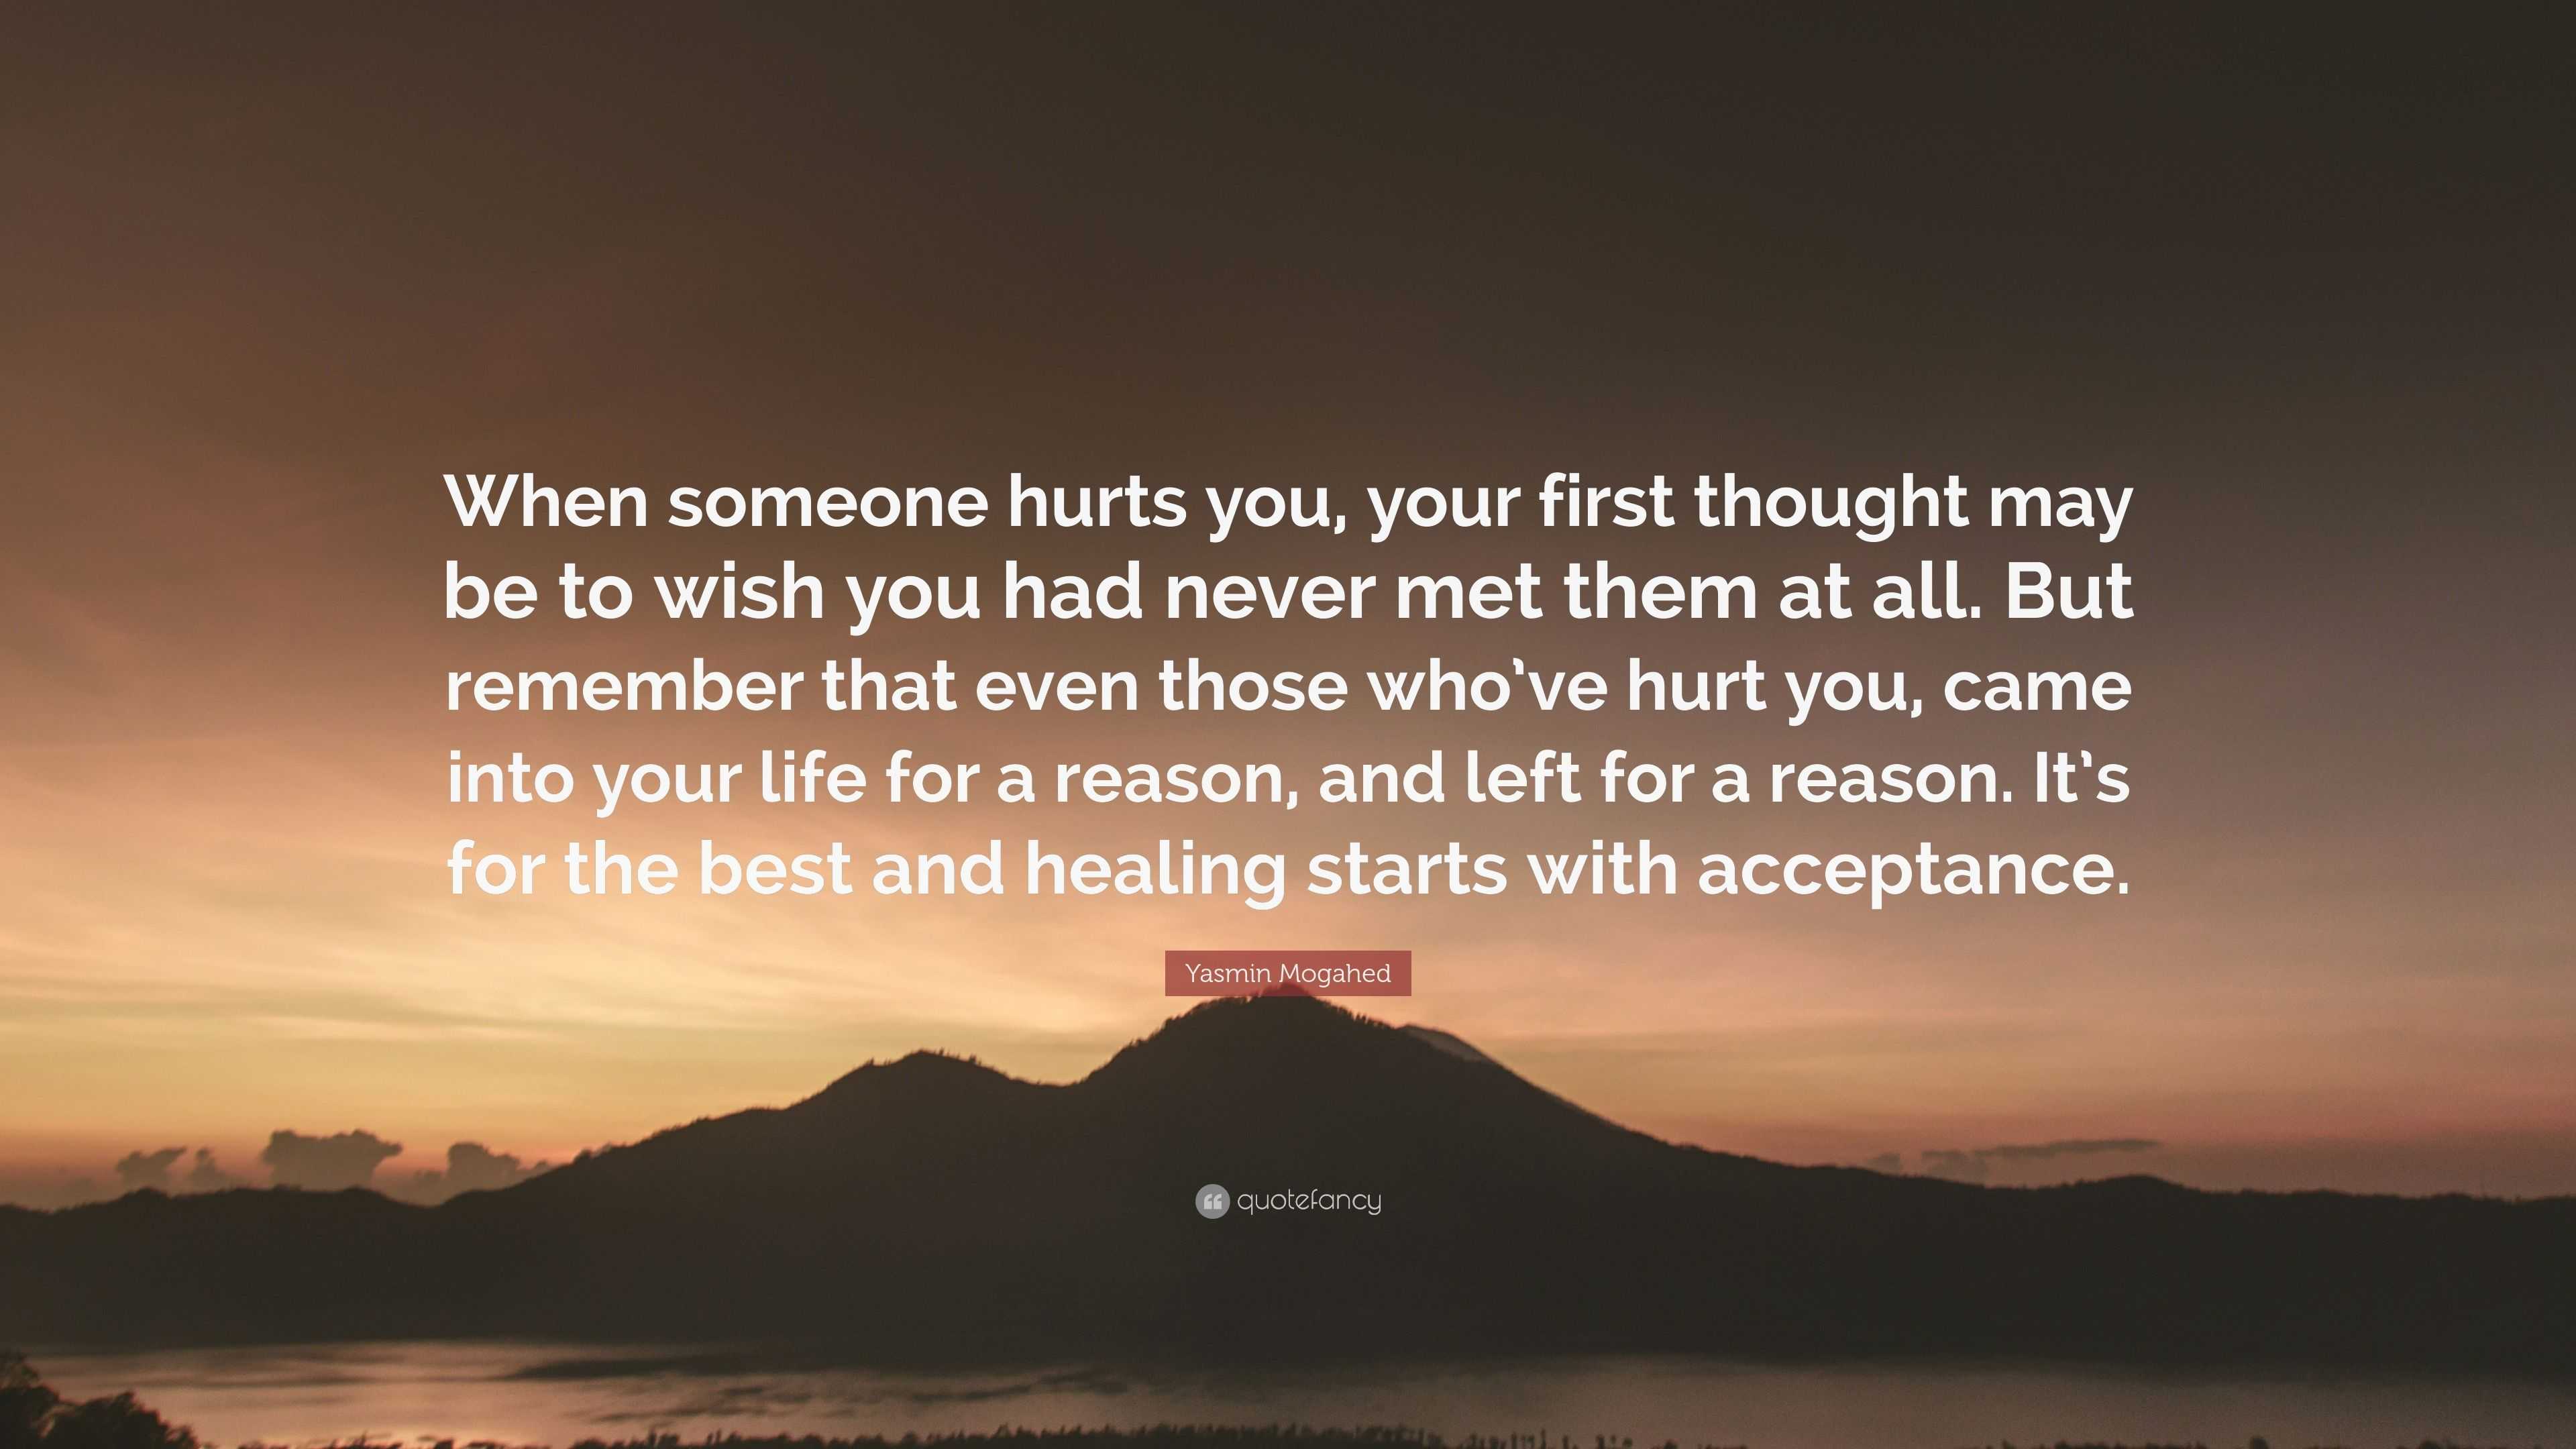 When someone hurts you quotes